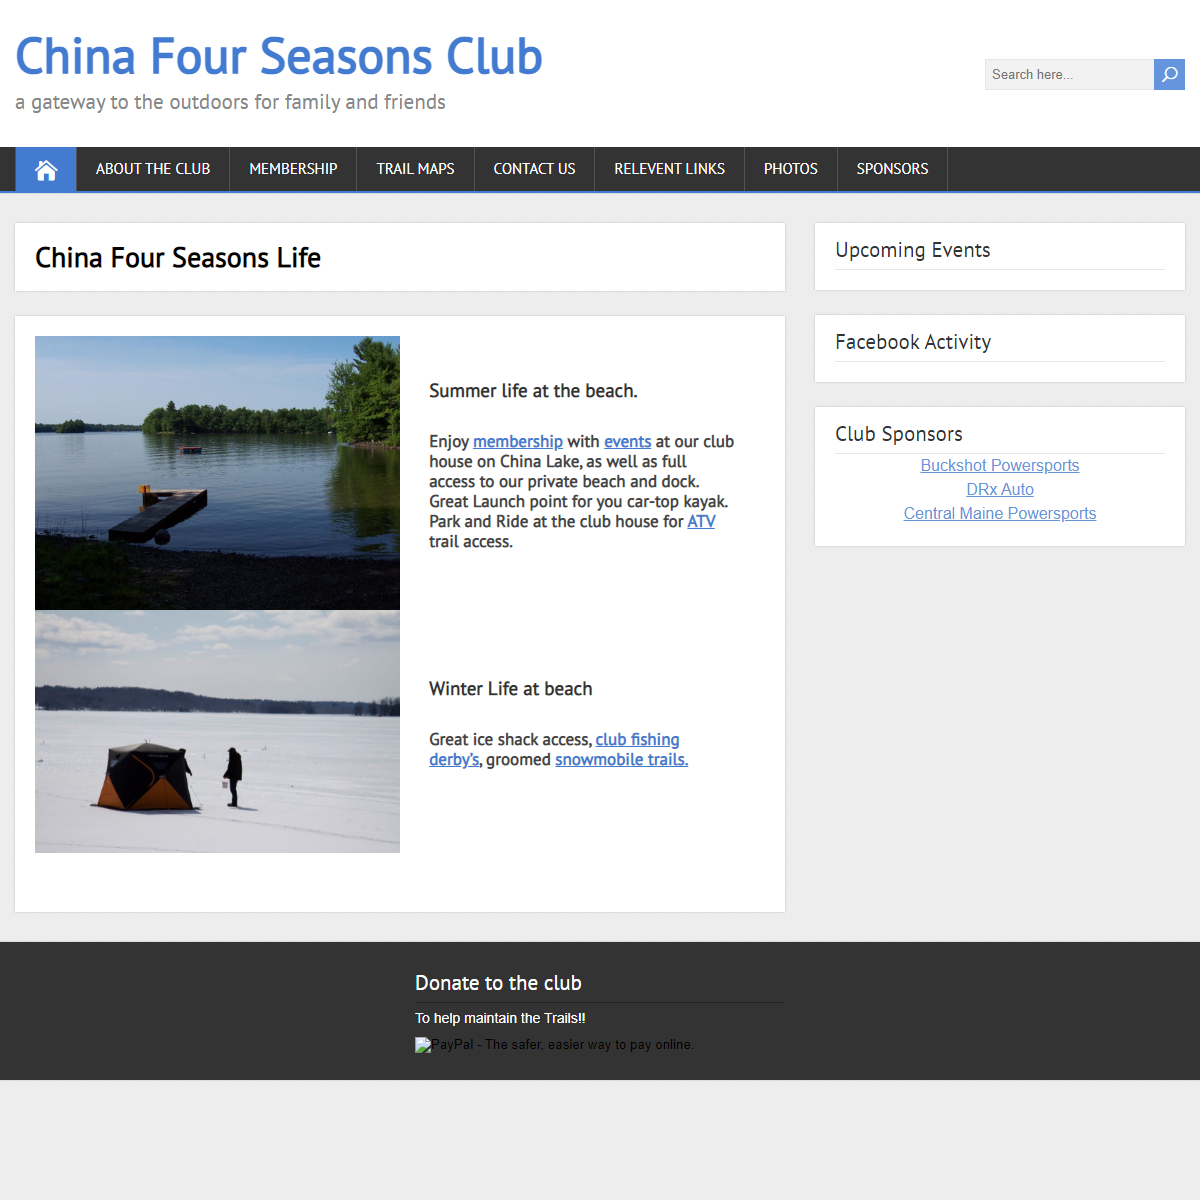 China Four Seasons Club â€“ a gateway to the outdoors for family and friends